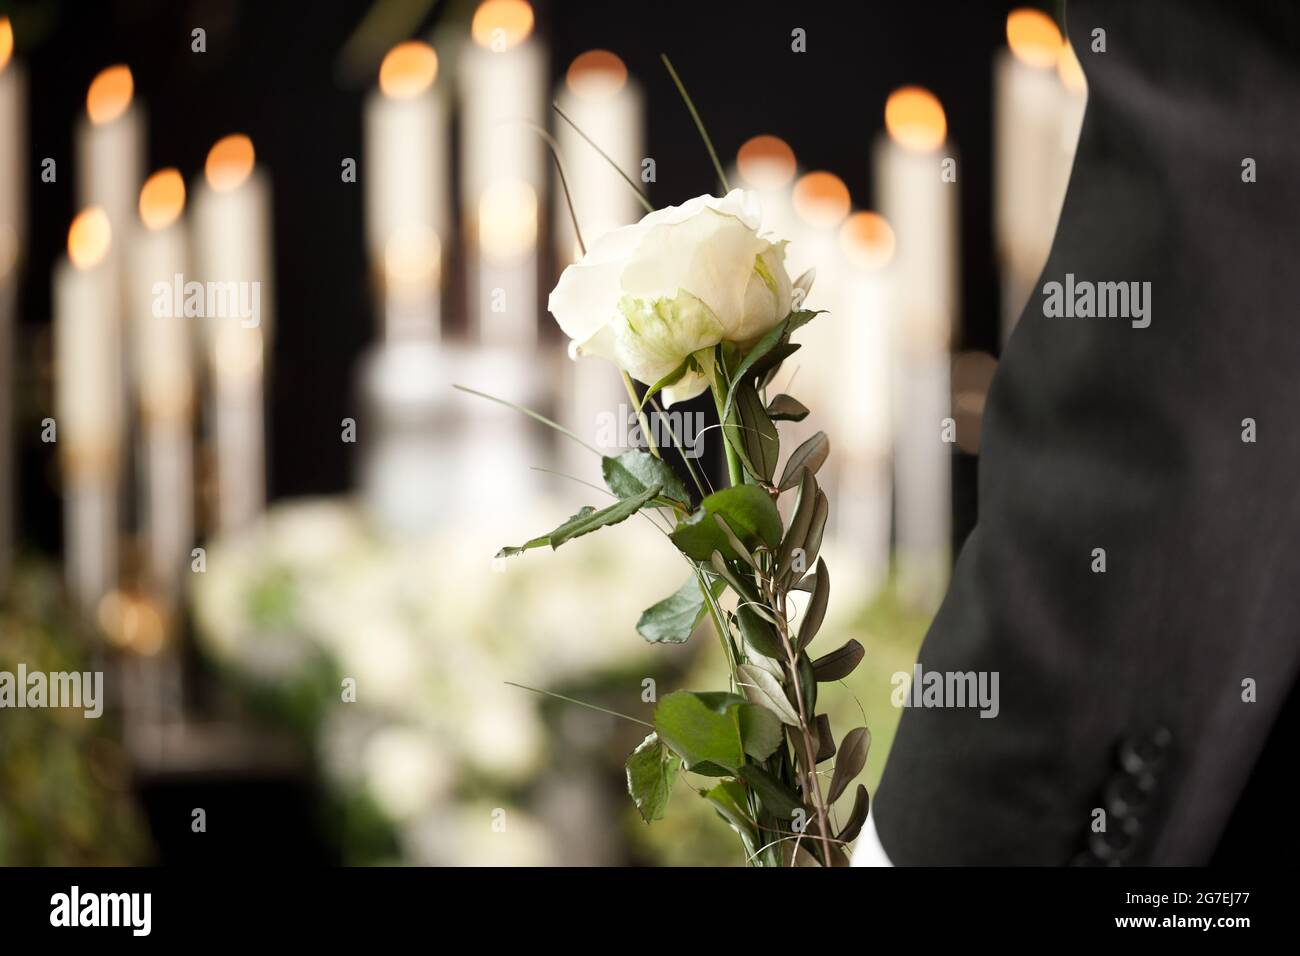 Religion, death and dolor  - man at funeral with white rose mourning the dead Stock Photo